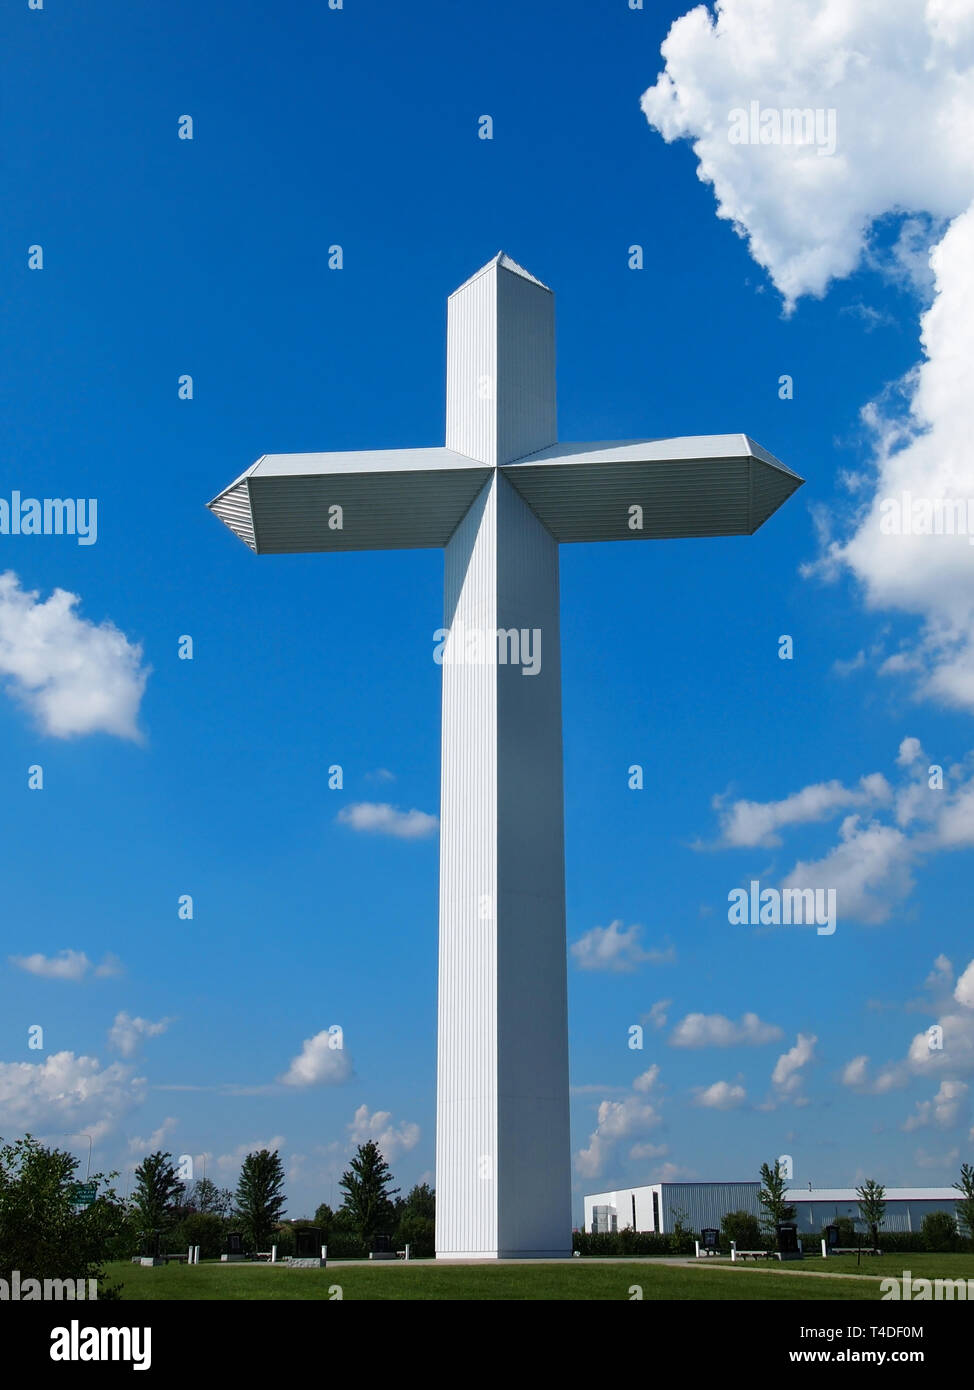 EFFINGHAM, ILLINOIS - JULY 9, 2018: A gigantic cross, known as the Cross of the Crossroads, stands towering above the intersection of two highways in  Stock Photo